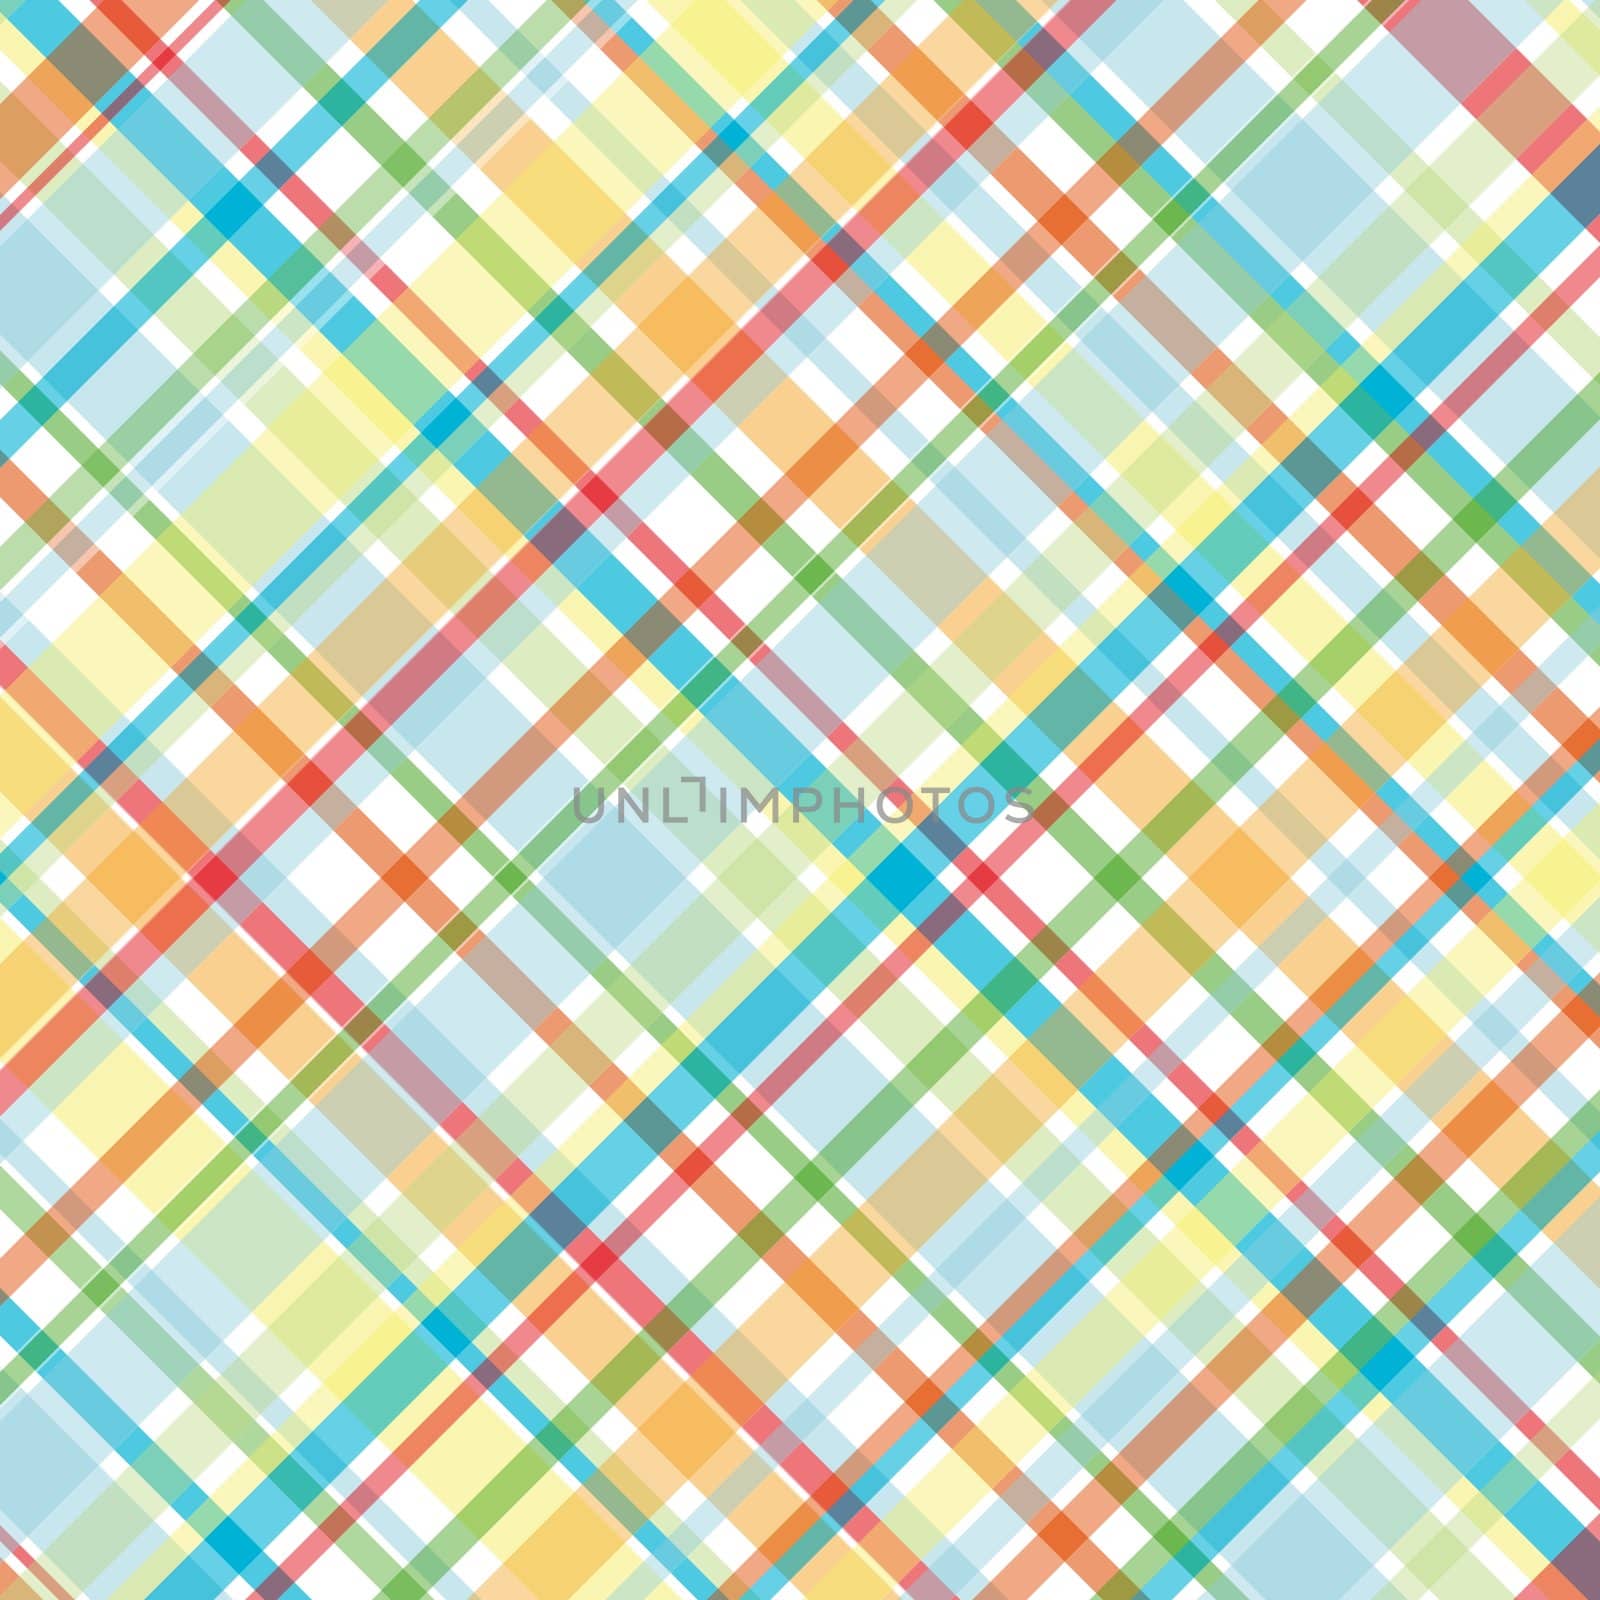 Bright Plaid Illustration by poofy